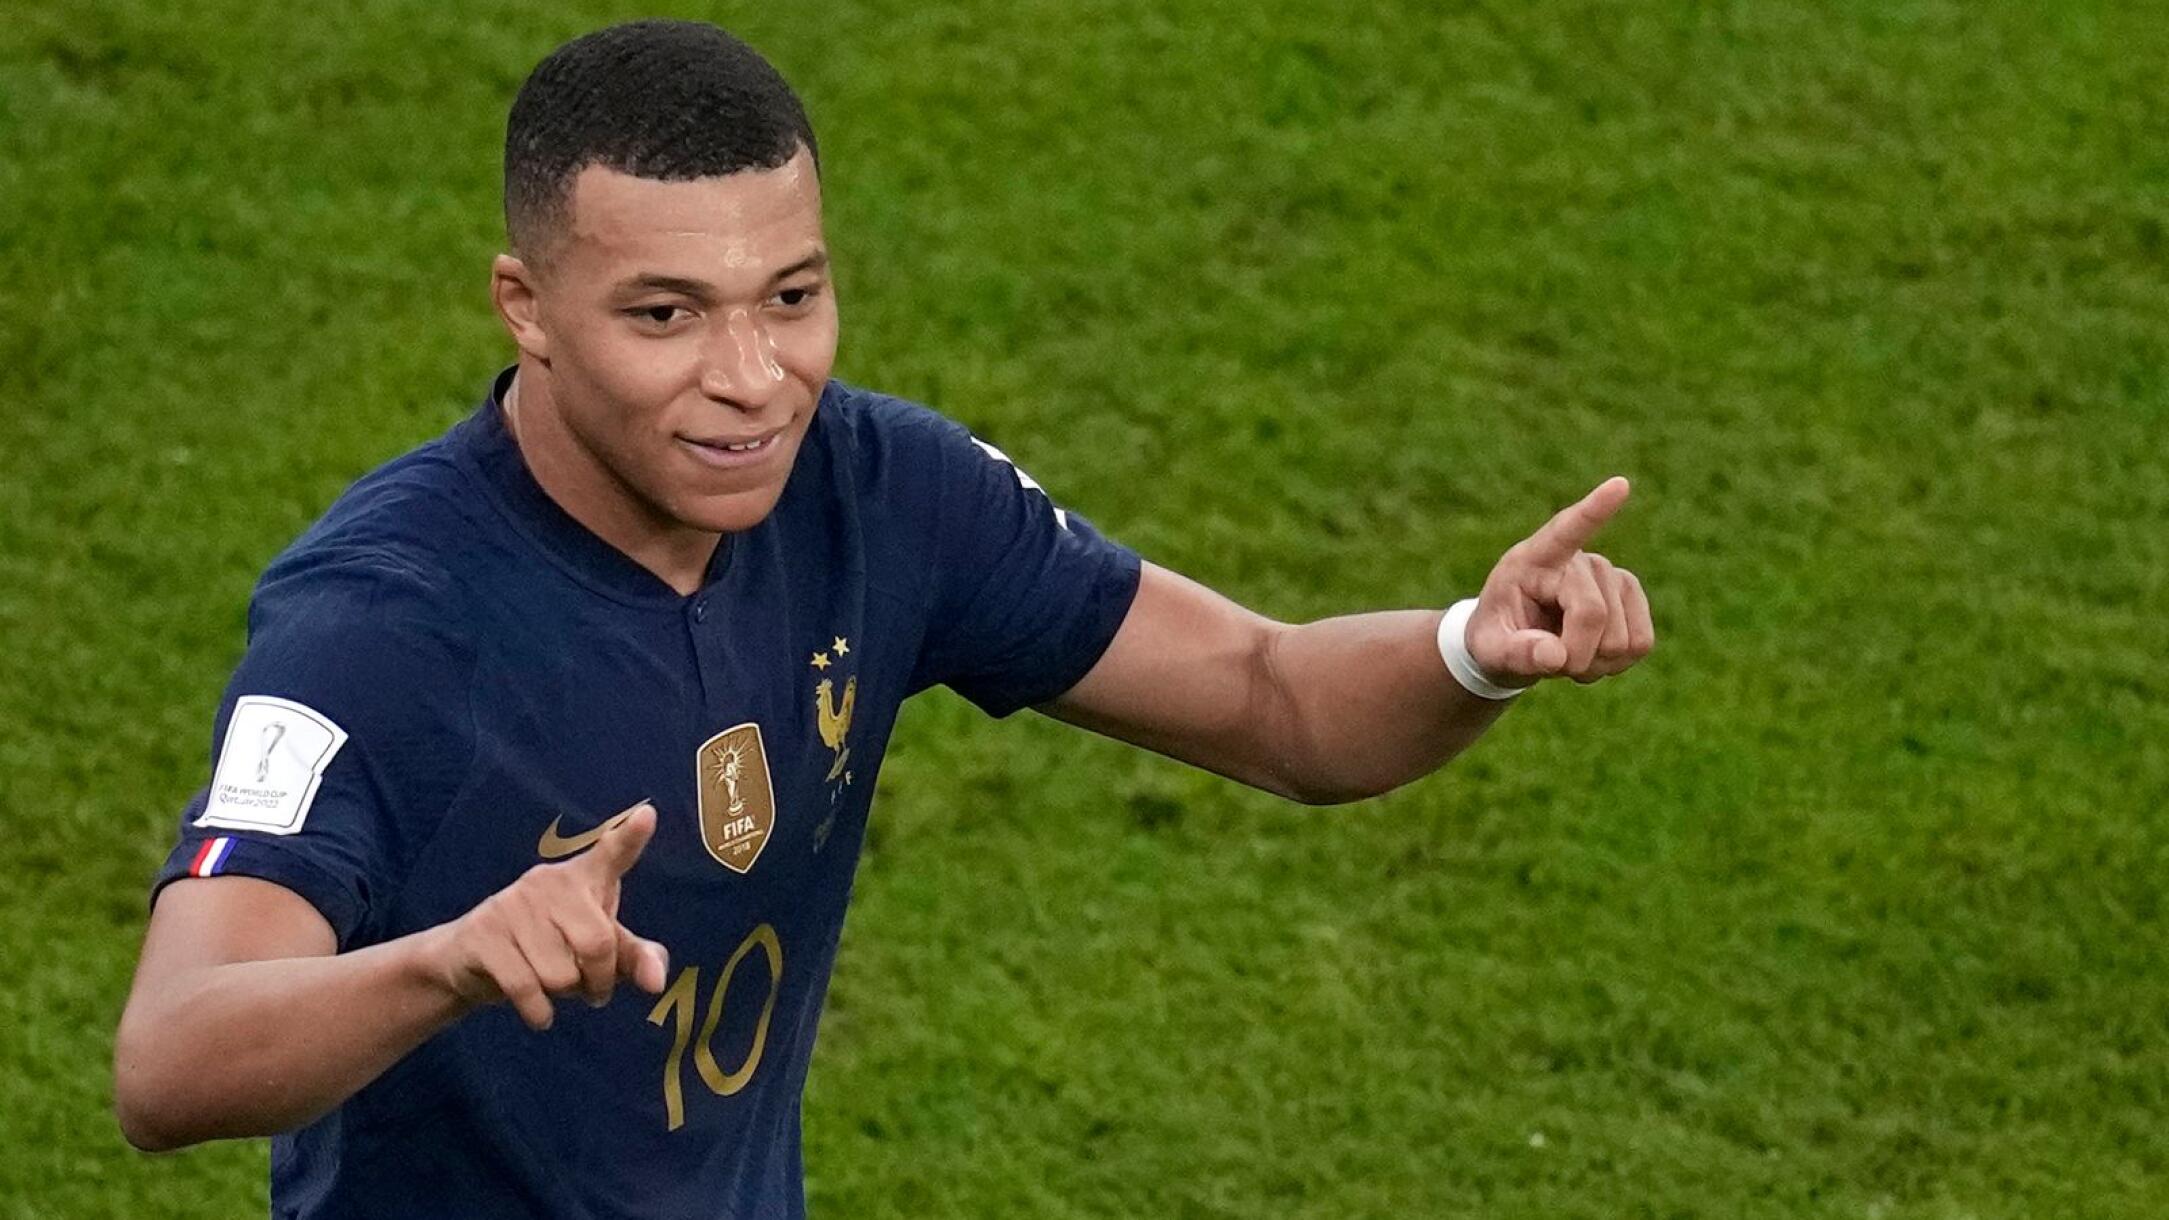 World Cup 2022 top scorer: Mbappe leads ahead of Messi and Giroud